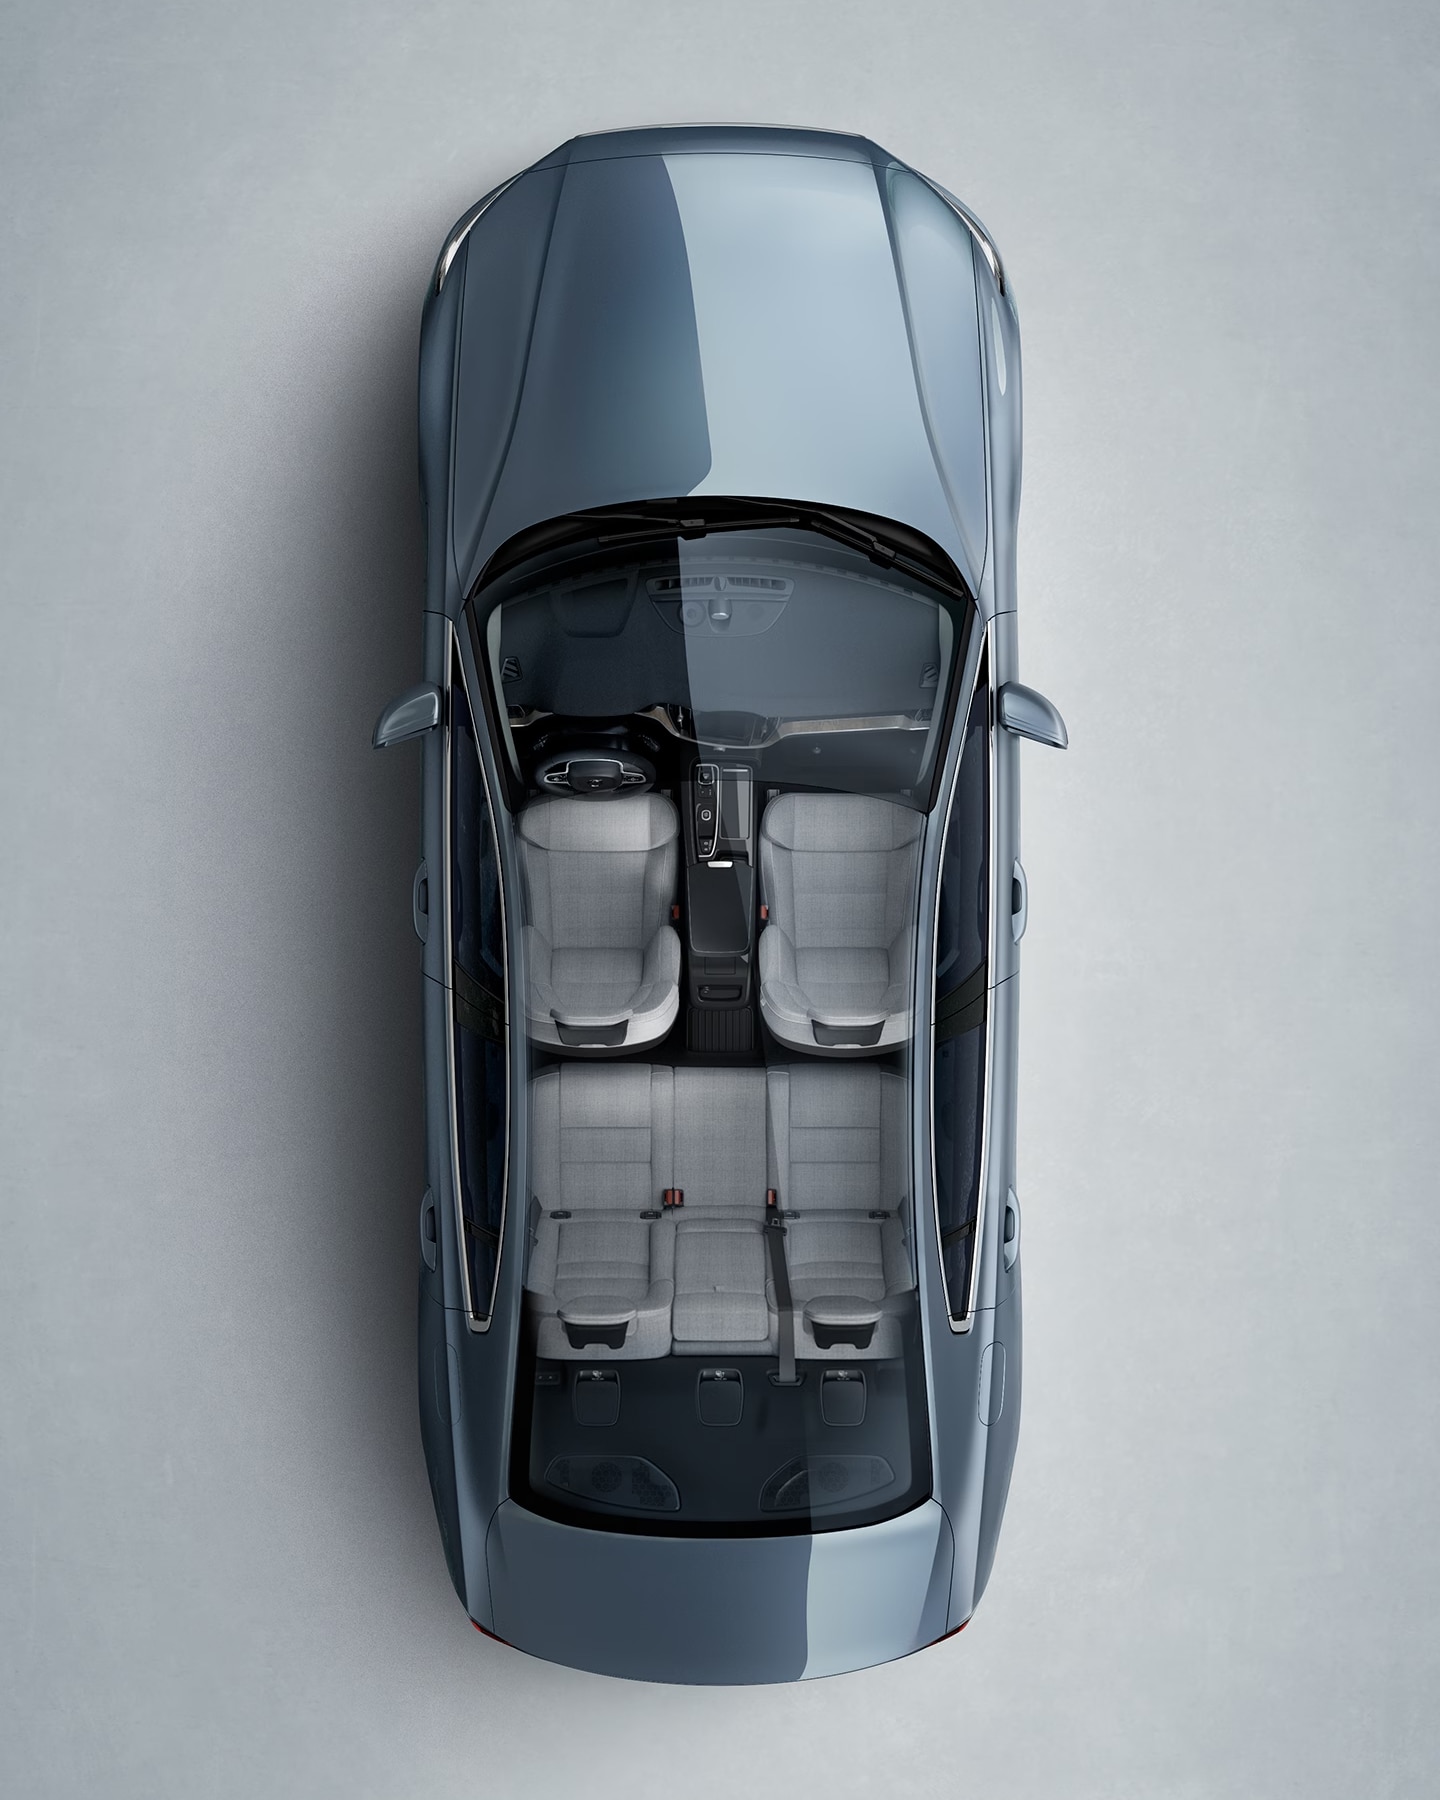 A gray Volvo S60 sedan seen from directly above with interior visible.